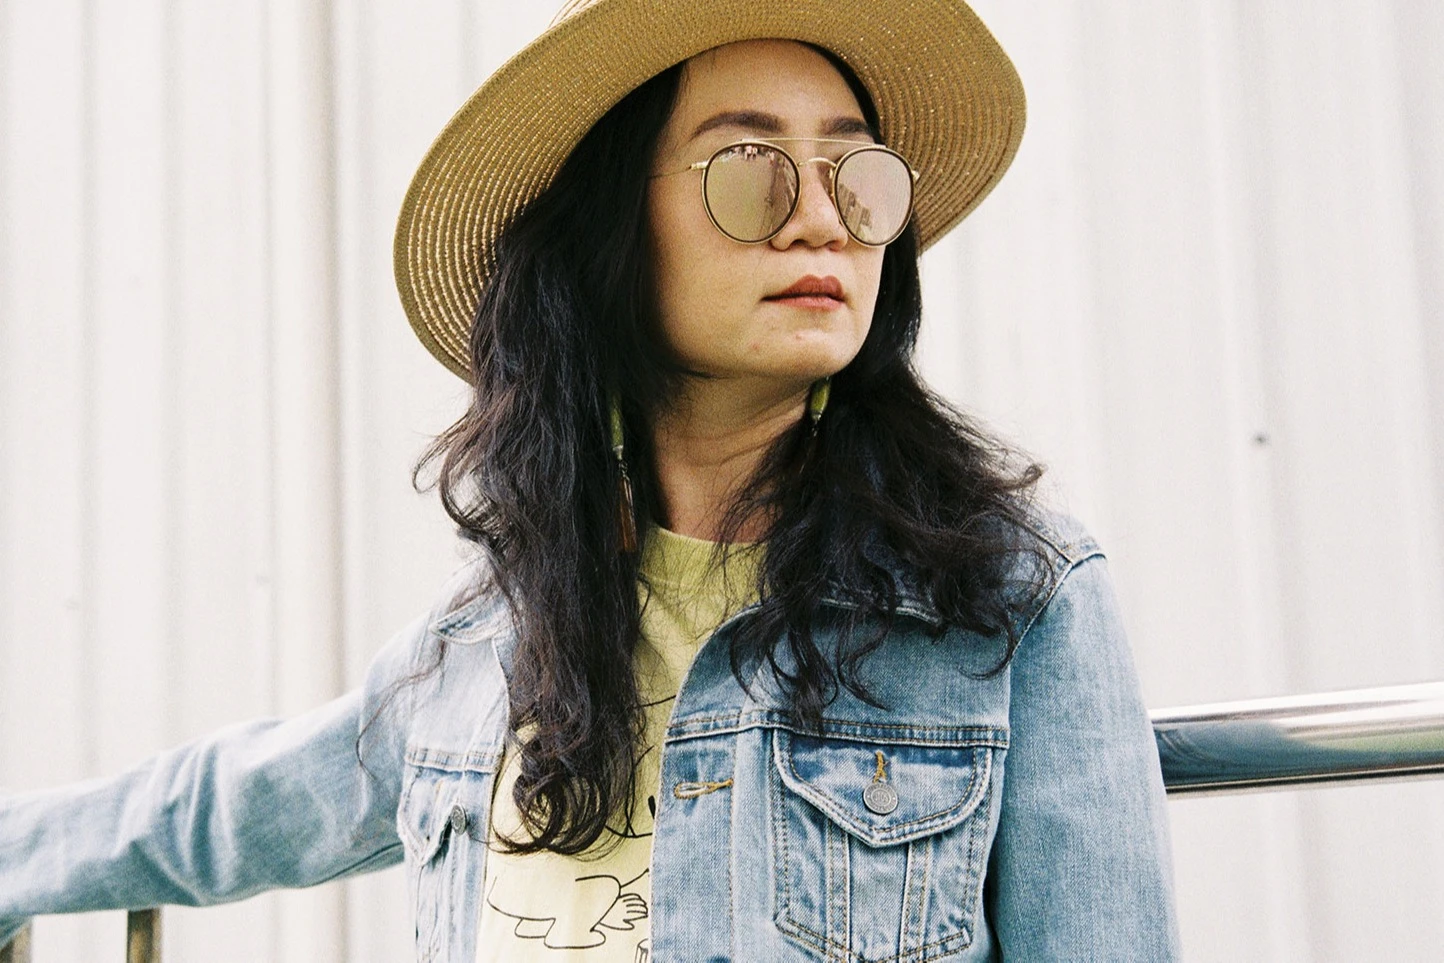 Asian woman in reflective sunglasses, denim jacket and straw hat looking away in thought. AW388